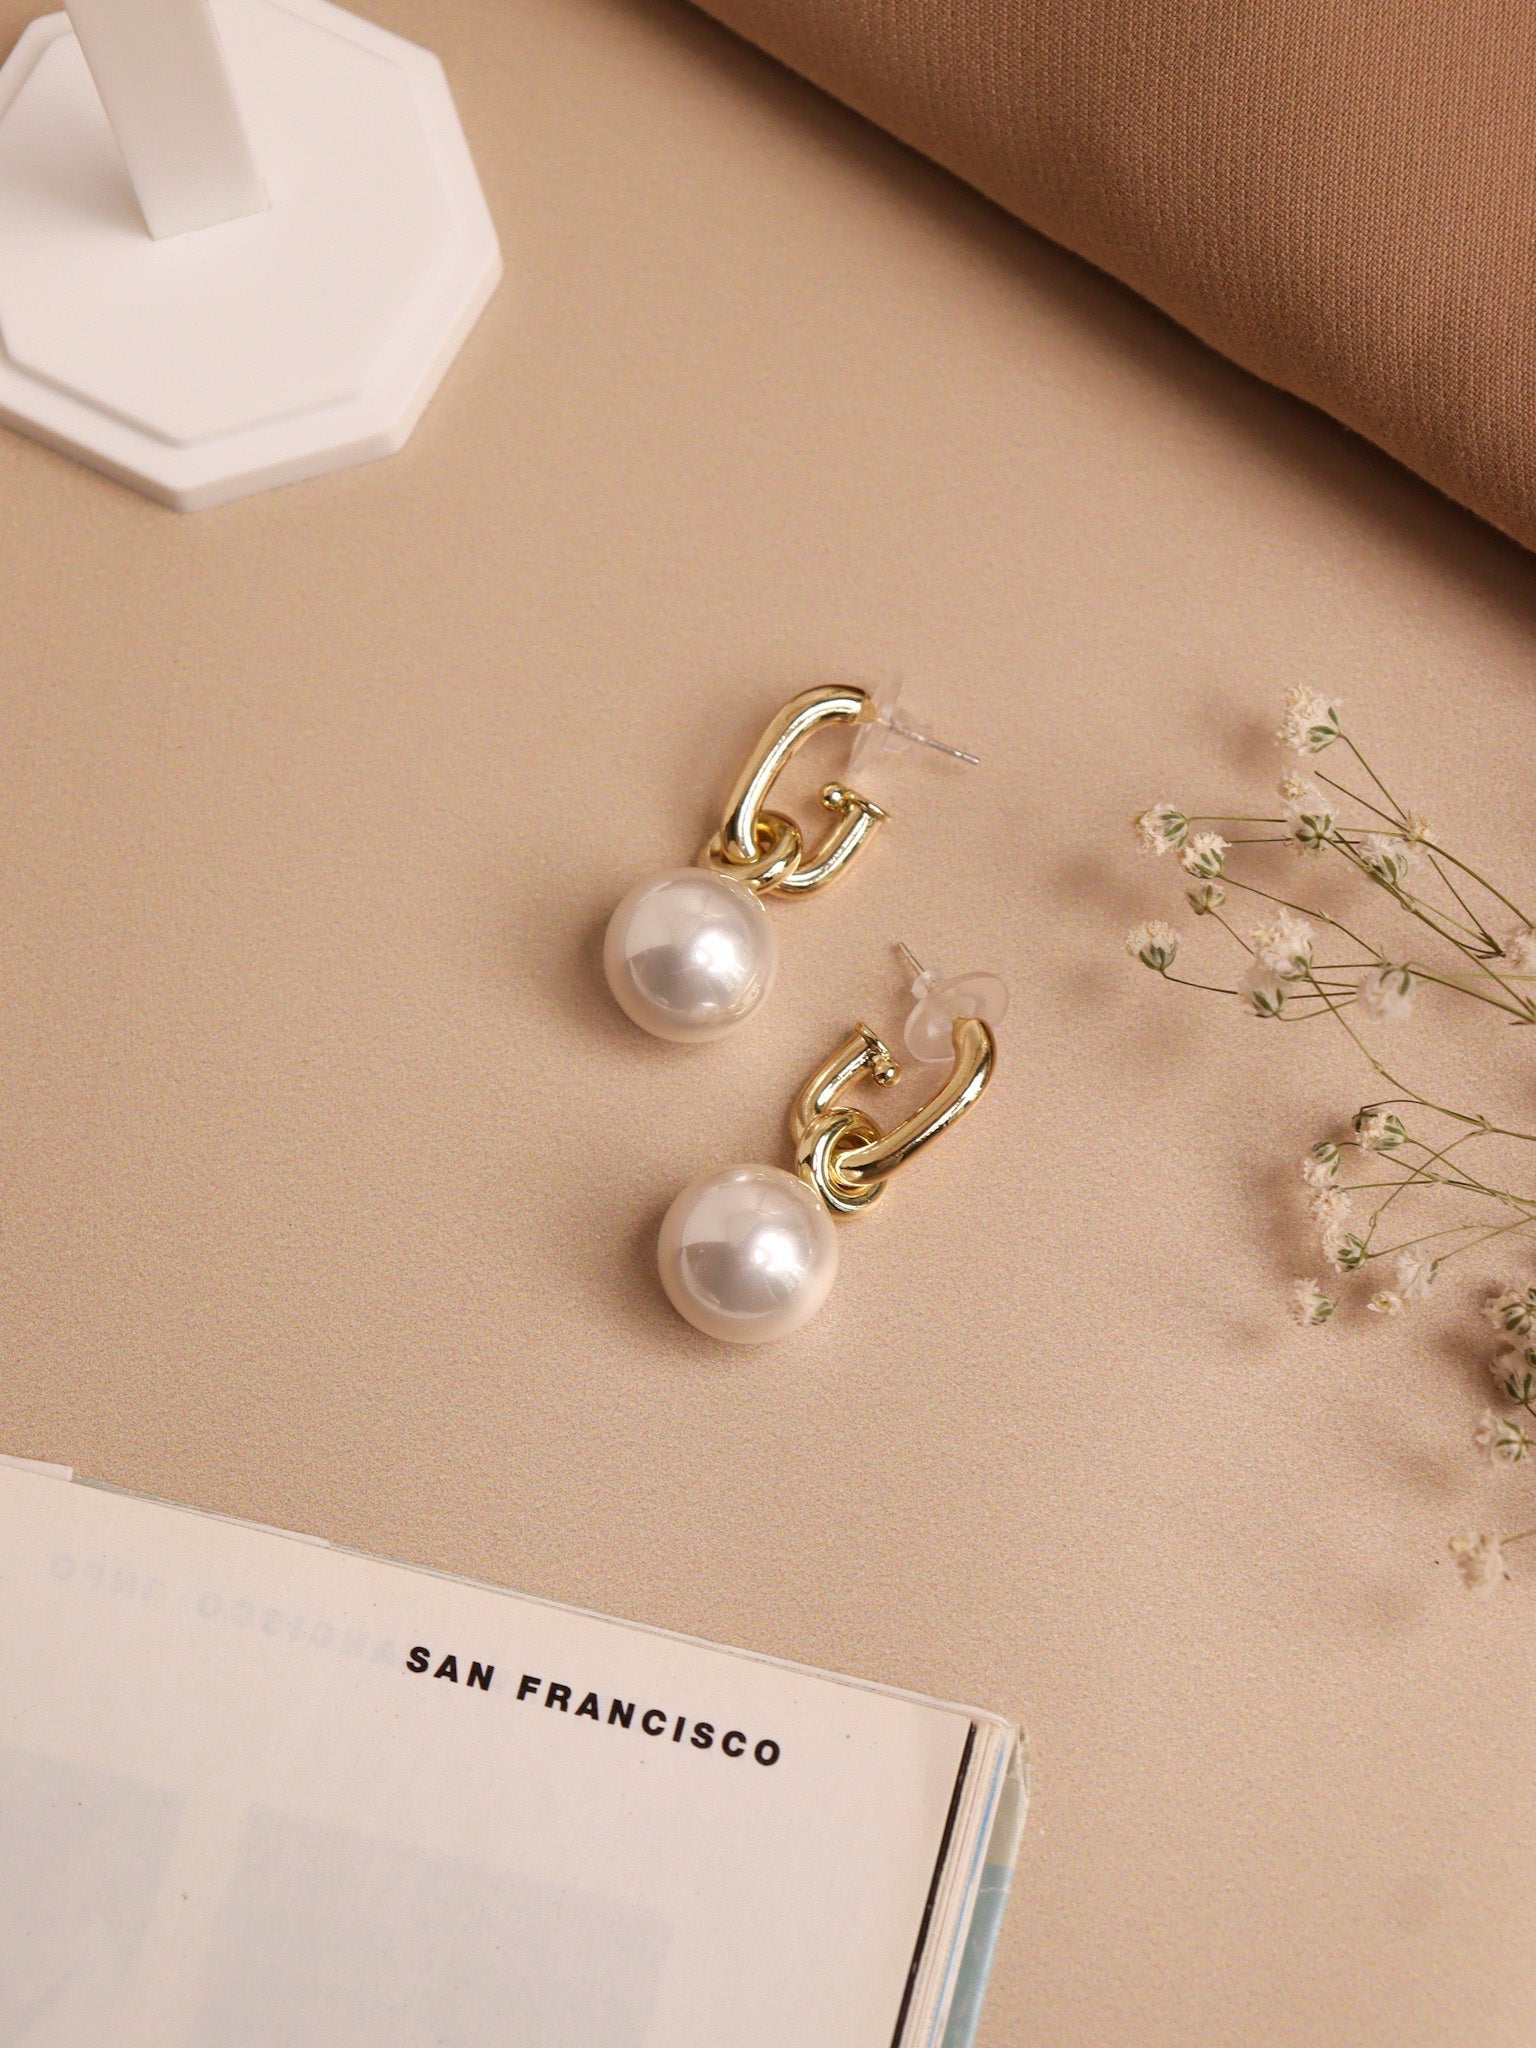 The Pearl Story - White Pearl Linked Drop Earrings 